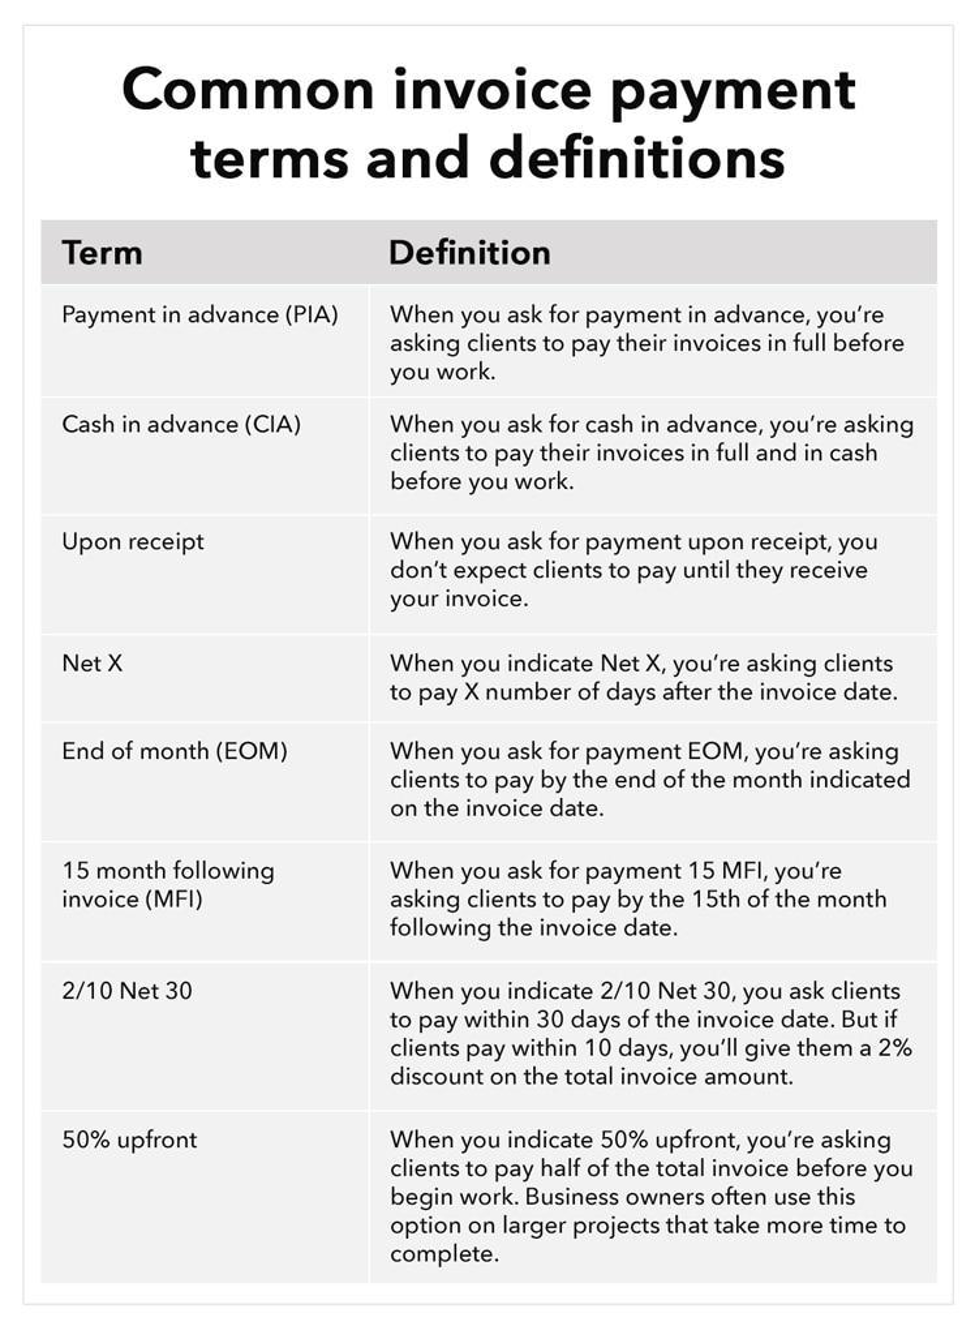 Comparison chart of common invoice payment terms and definitions